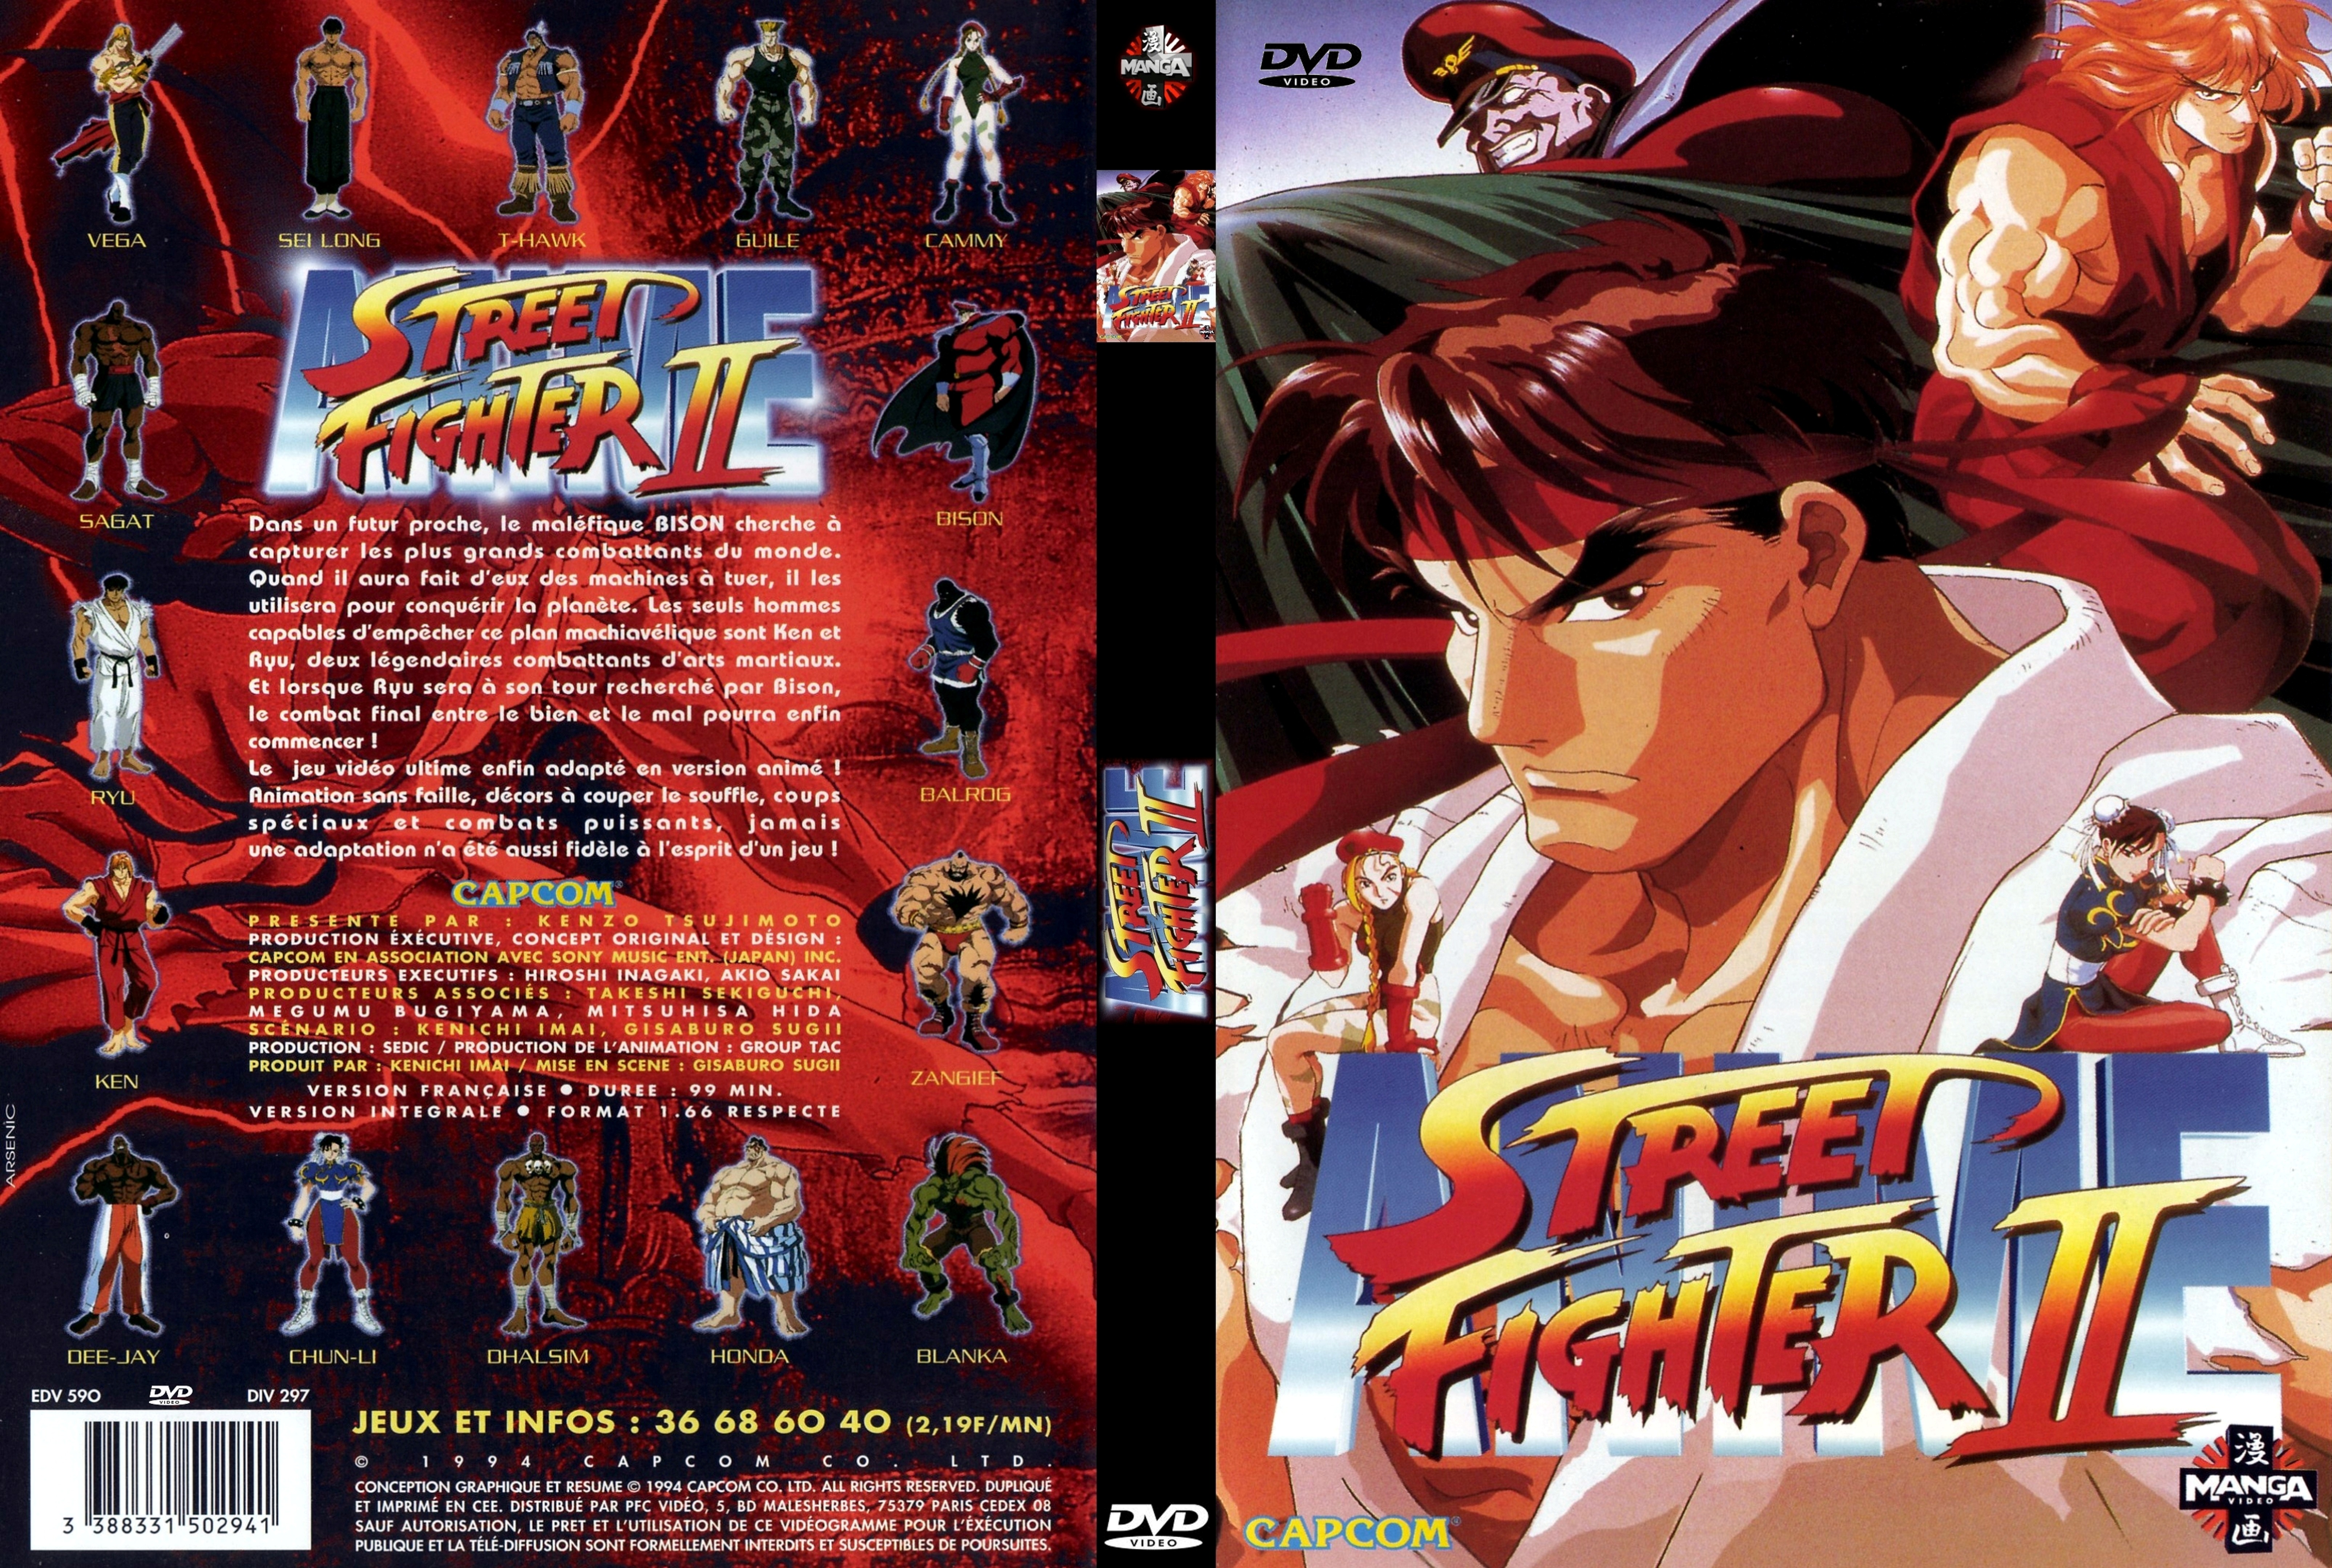 Jaquette DVD Street fighter 2 anime